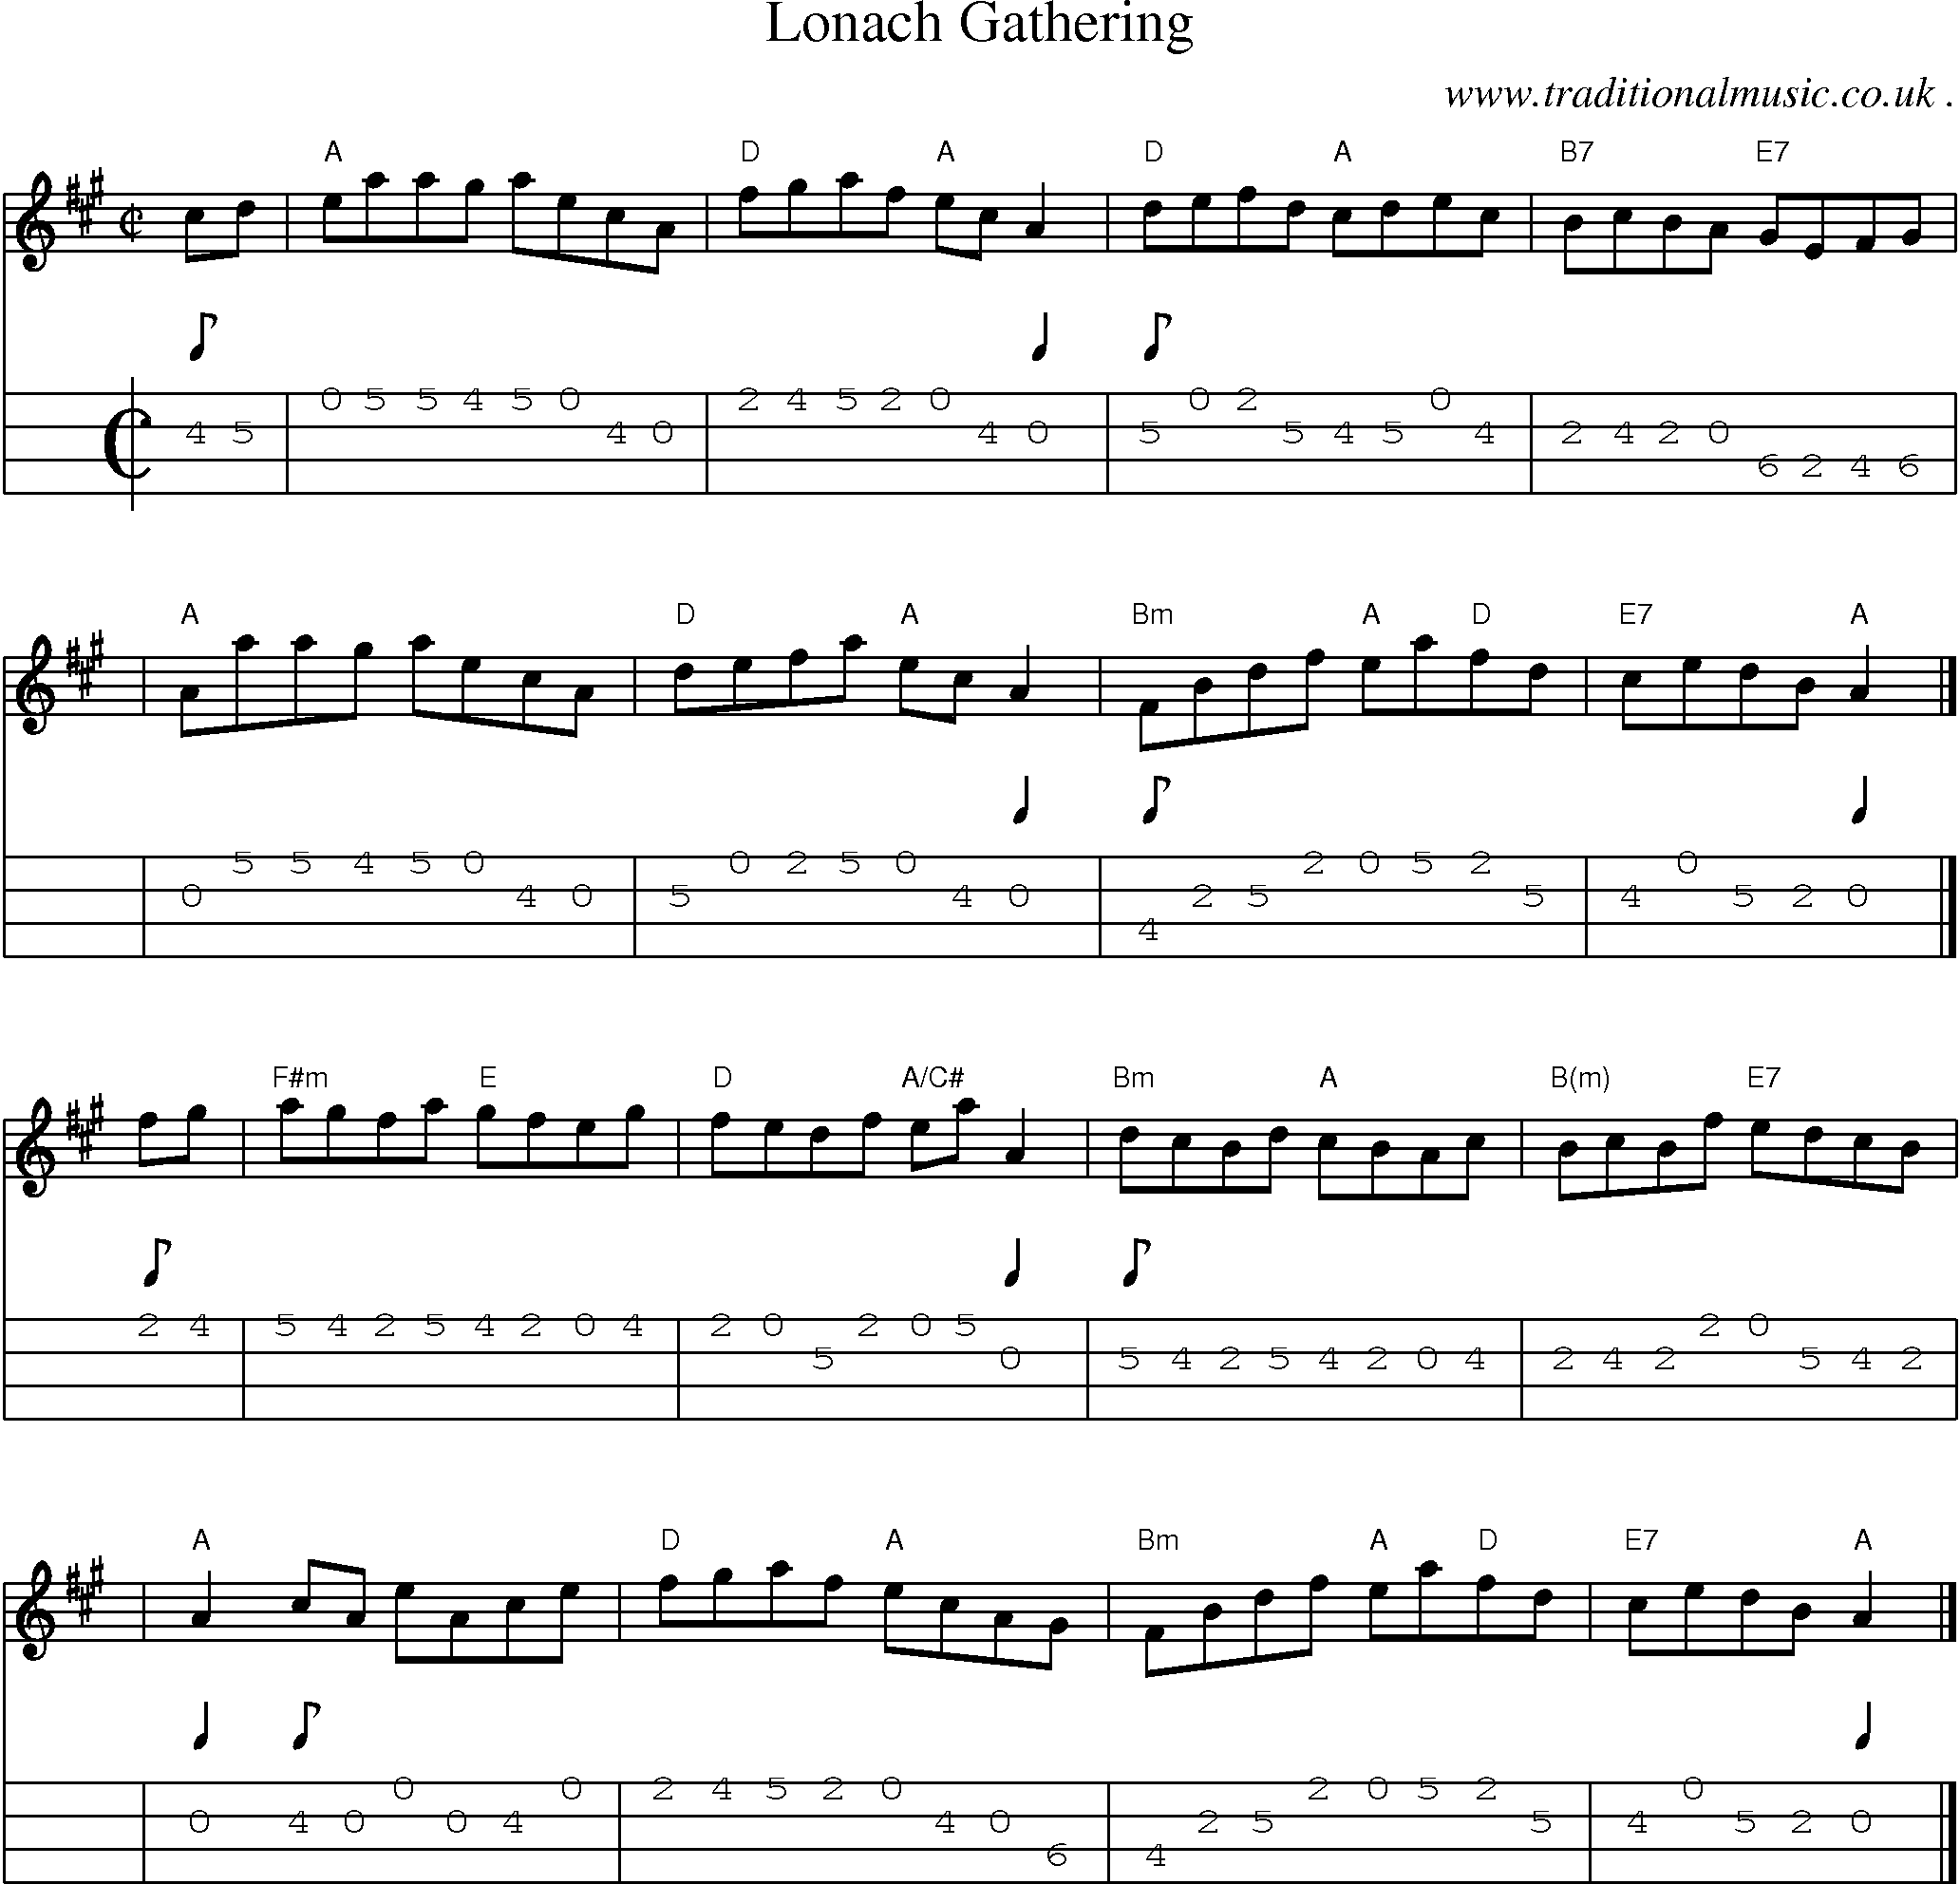 Sheet-music  score, Chords and Mandolin Tabs for Lonach Gathering